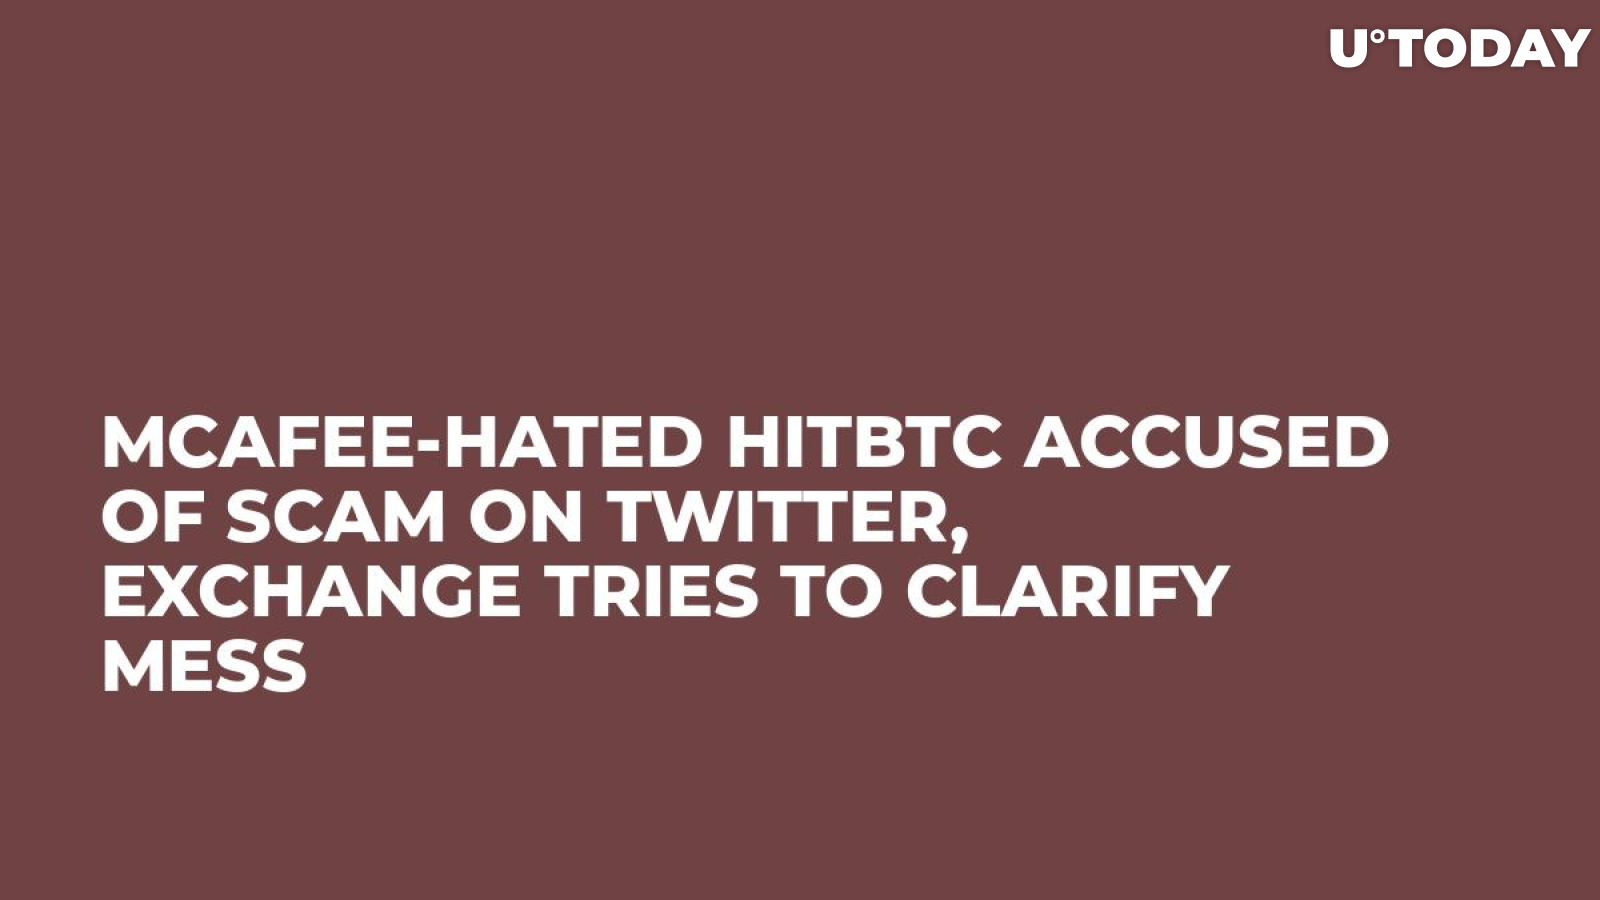 McAfee-Hated HitBTC Accused of Scam on Twitter, Exchange Tries to Clarify Mess